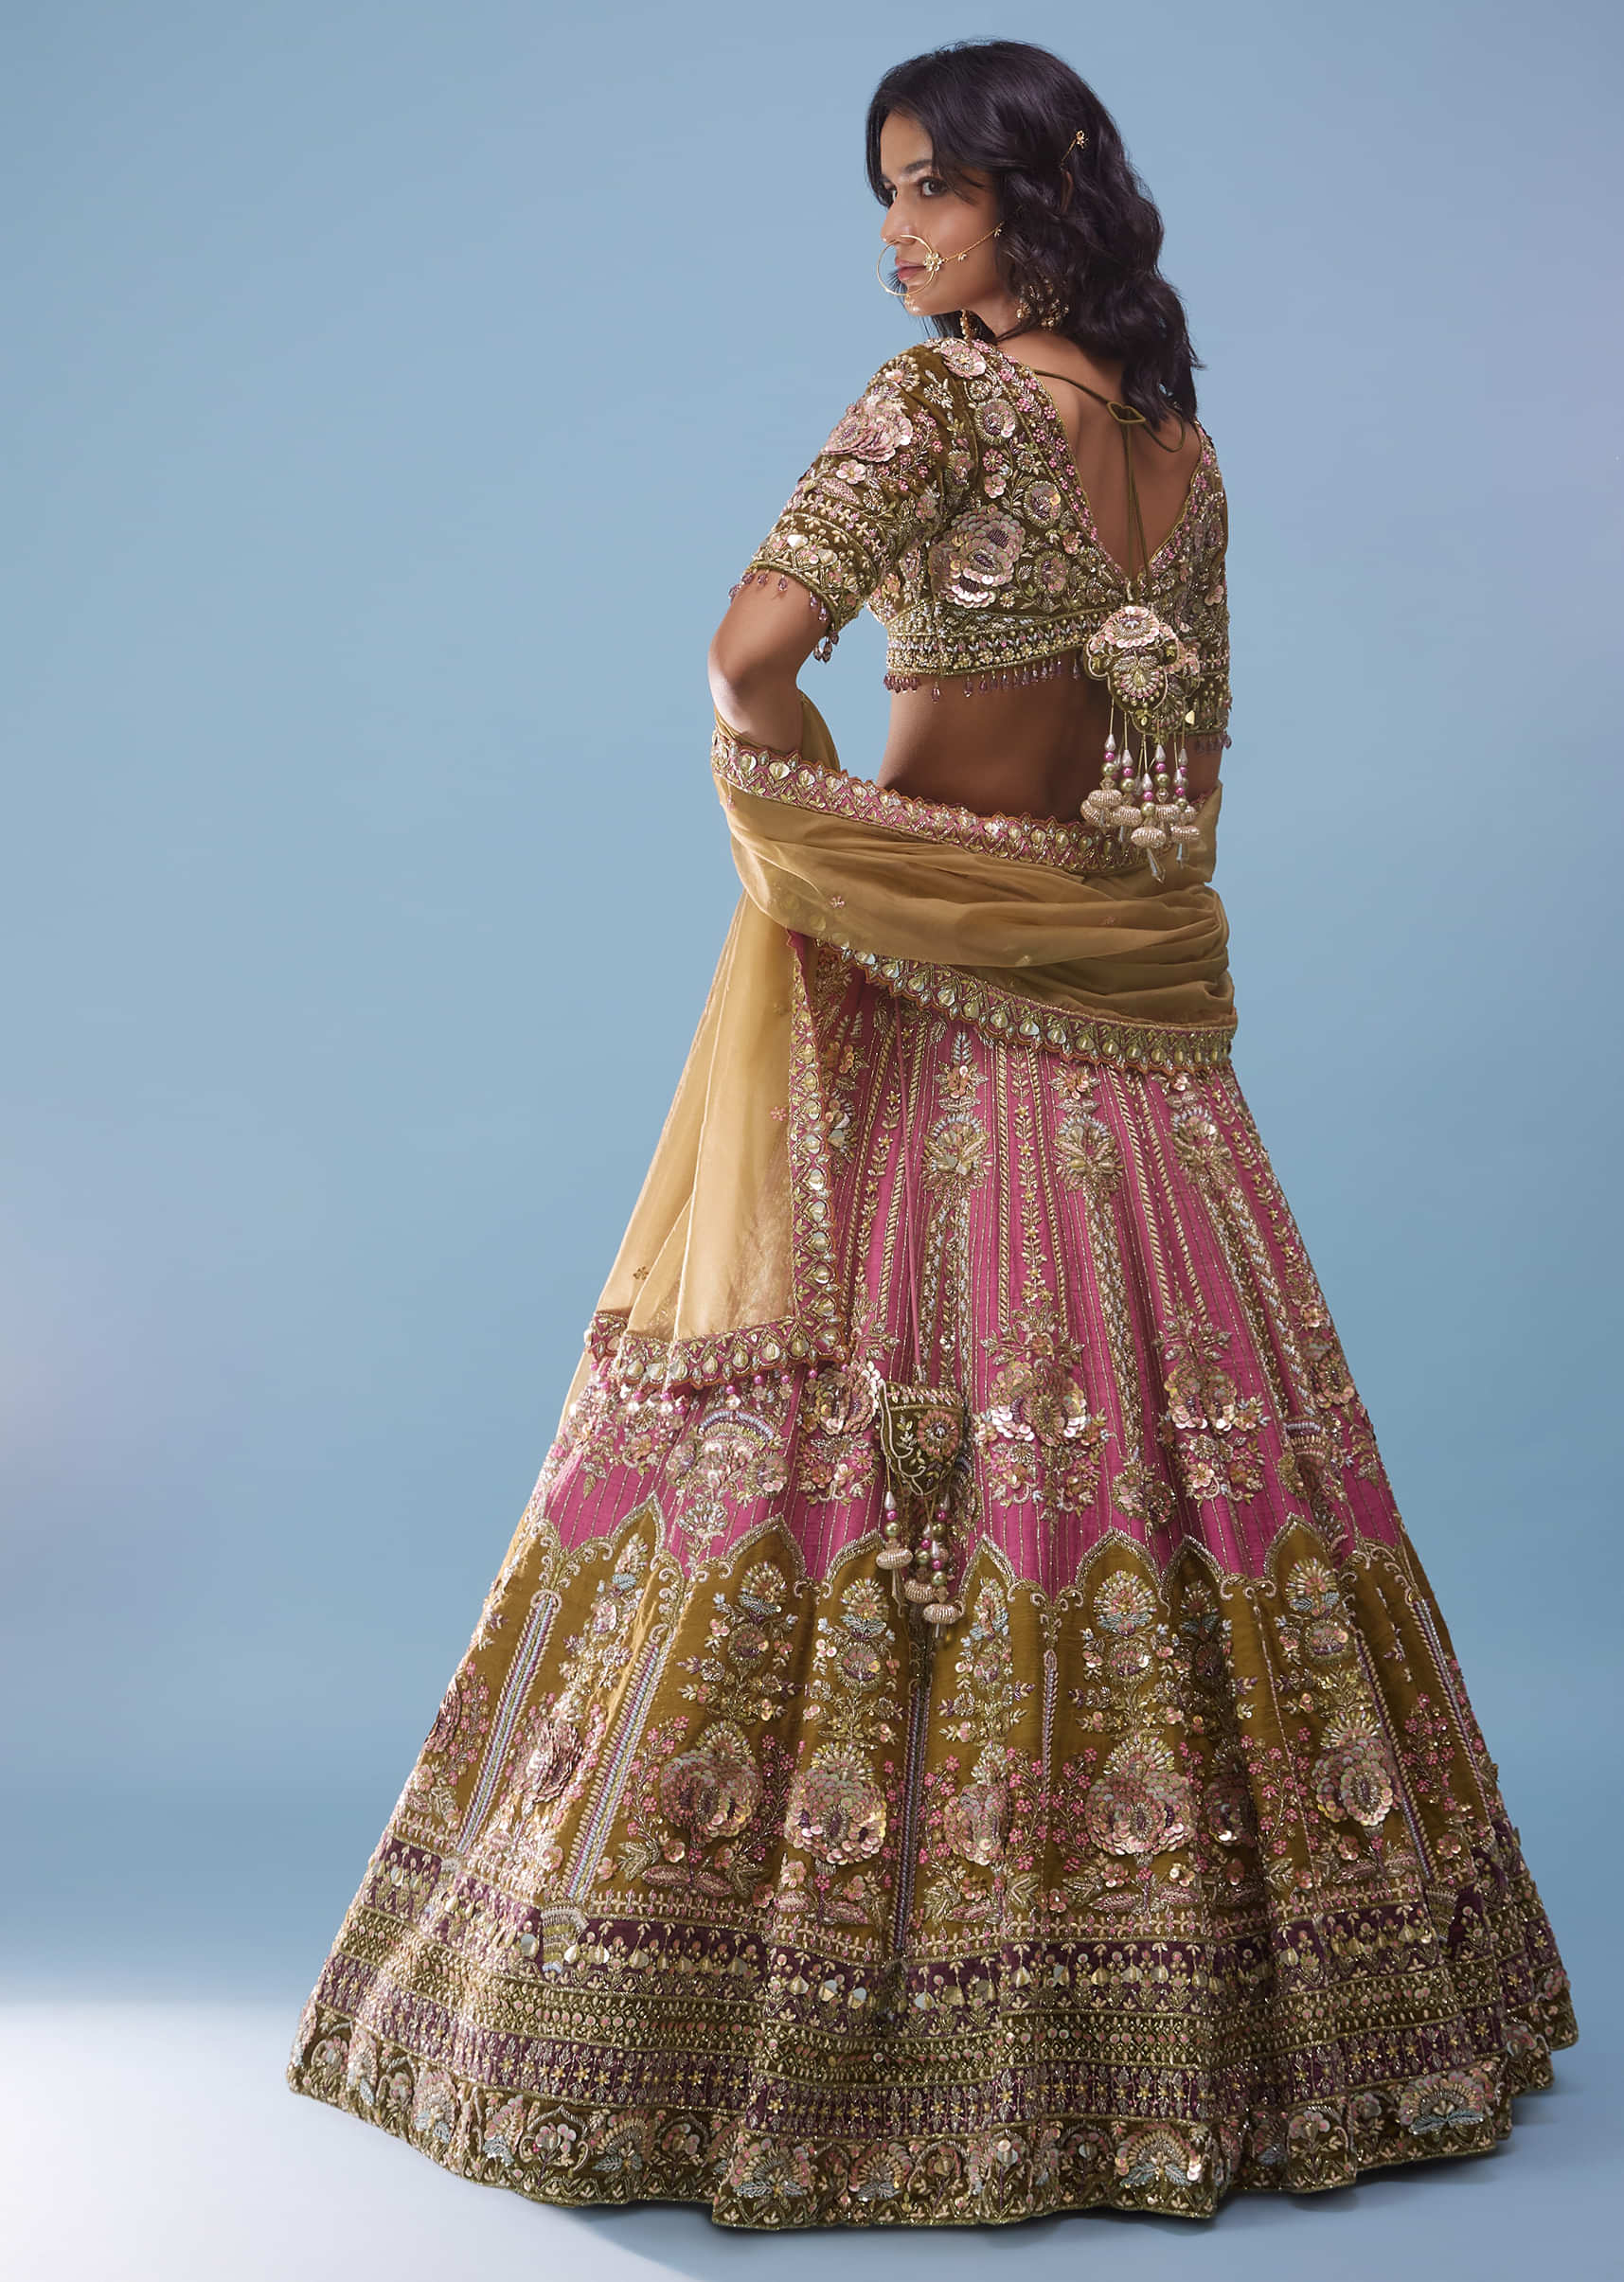 Rose Pink Bridal Lehenga In Raw Silk And Velvet With Heavy Embroidery - NOOR 2022